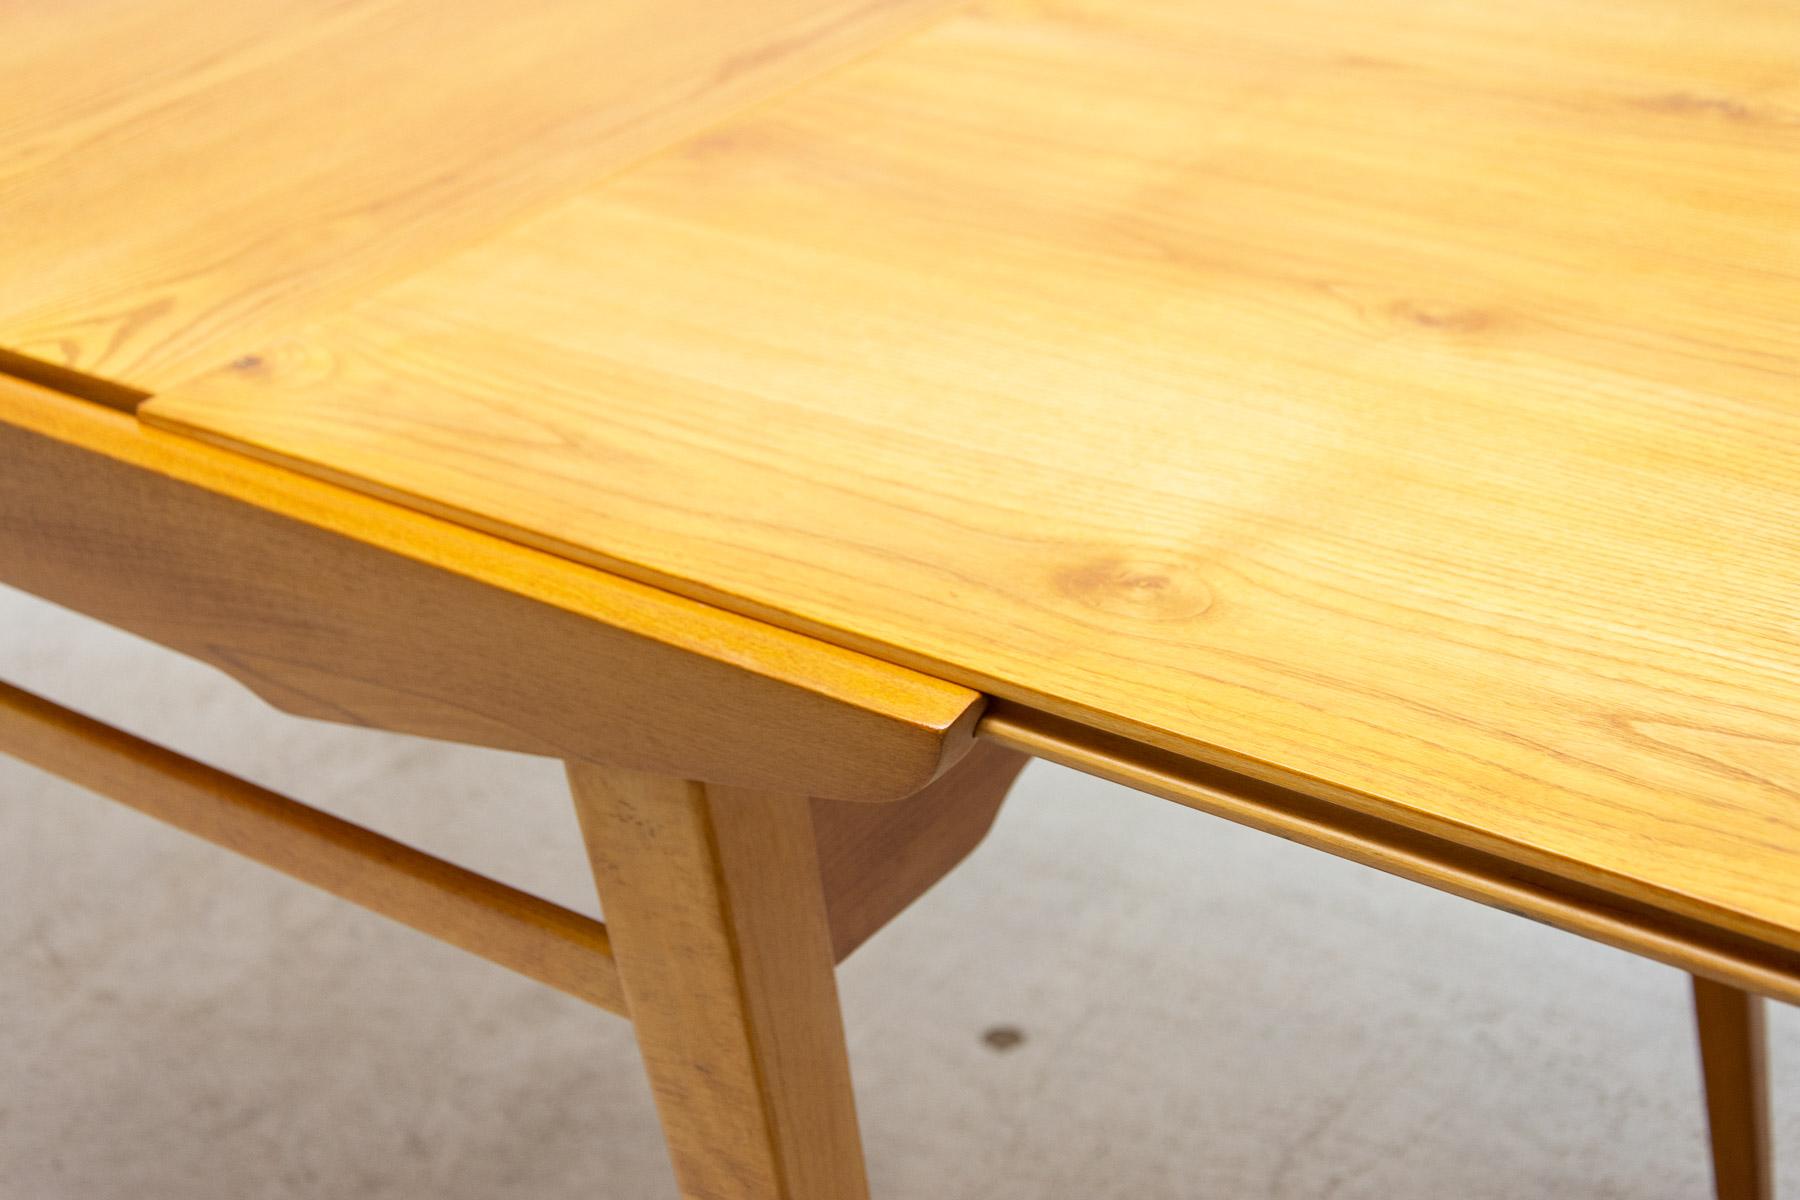 Midcentury Folding Dining Table by Bohumil Landsman for Jitona, 1970s For Sale 9